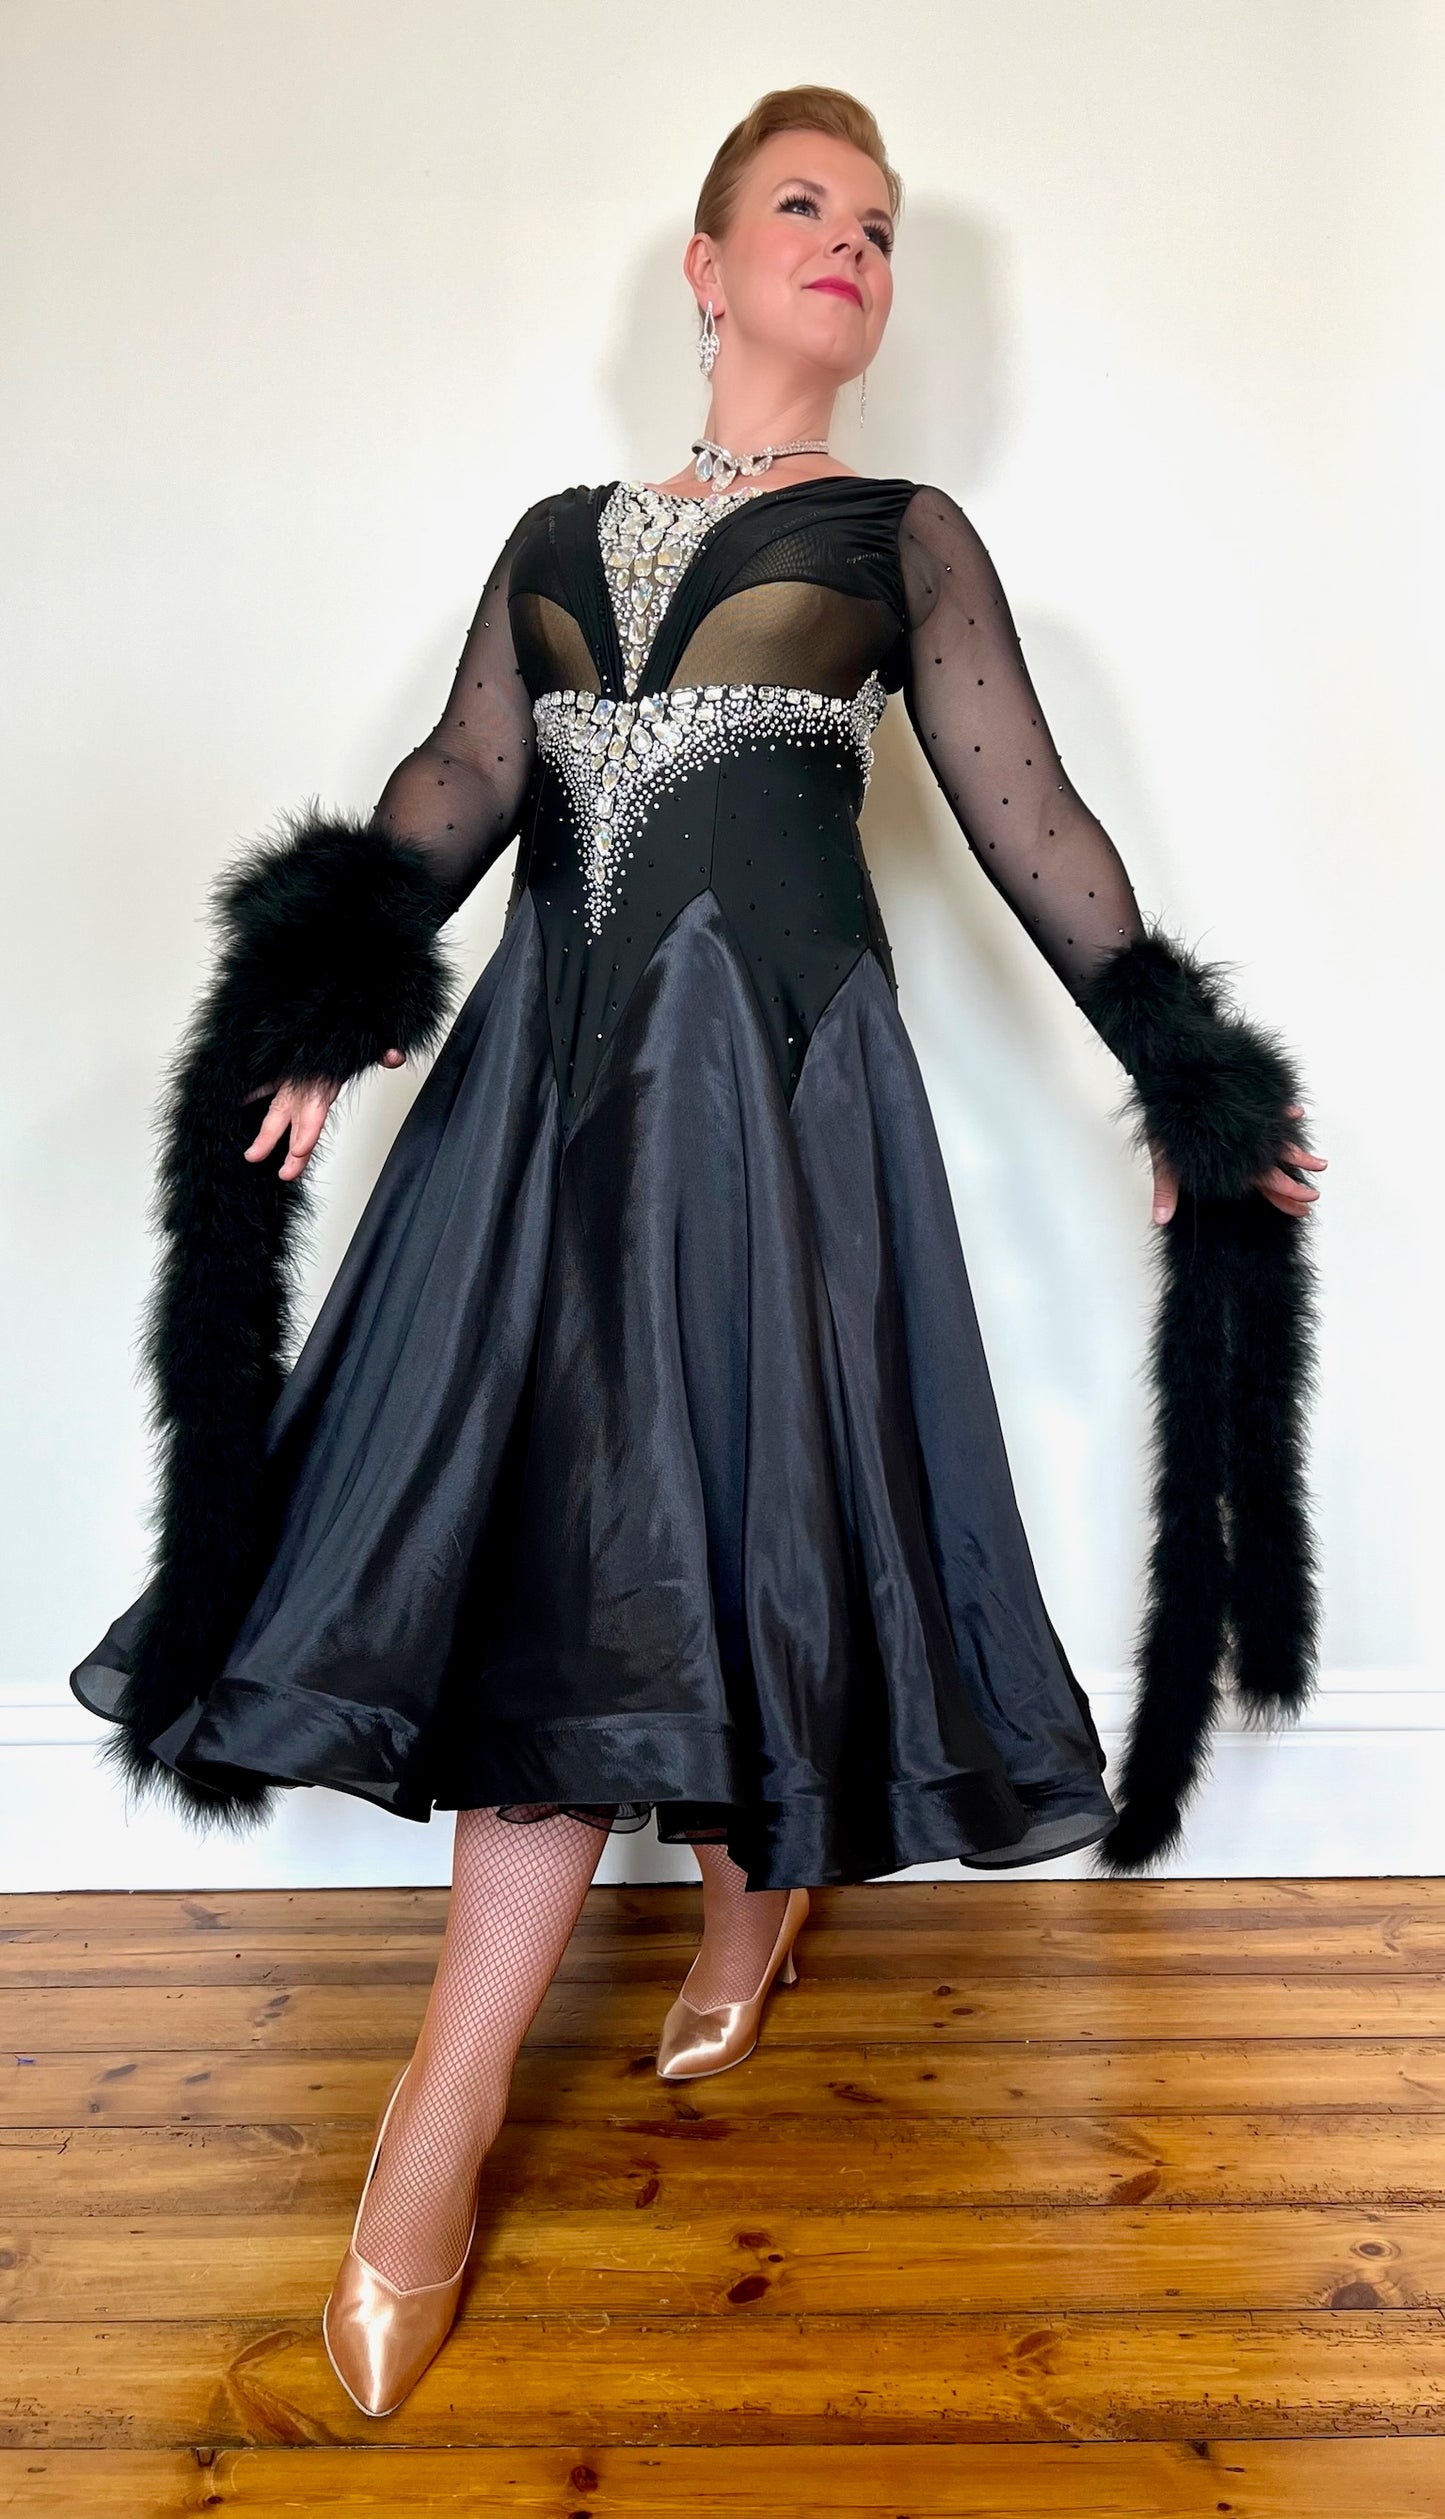 324 Black Ballroom Dress with feather floats to the wrist. Rouched detail to the chest area. Heavily decorated stoning to the front & back in AB. High back.